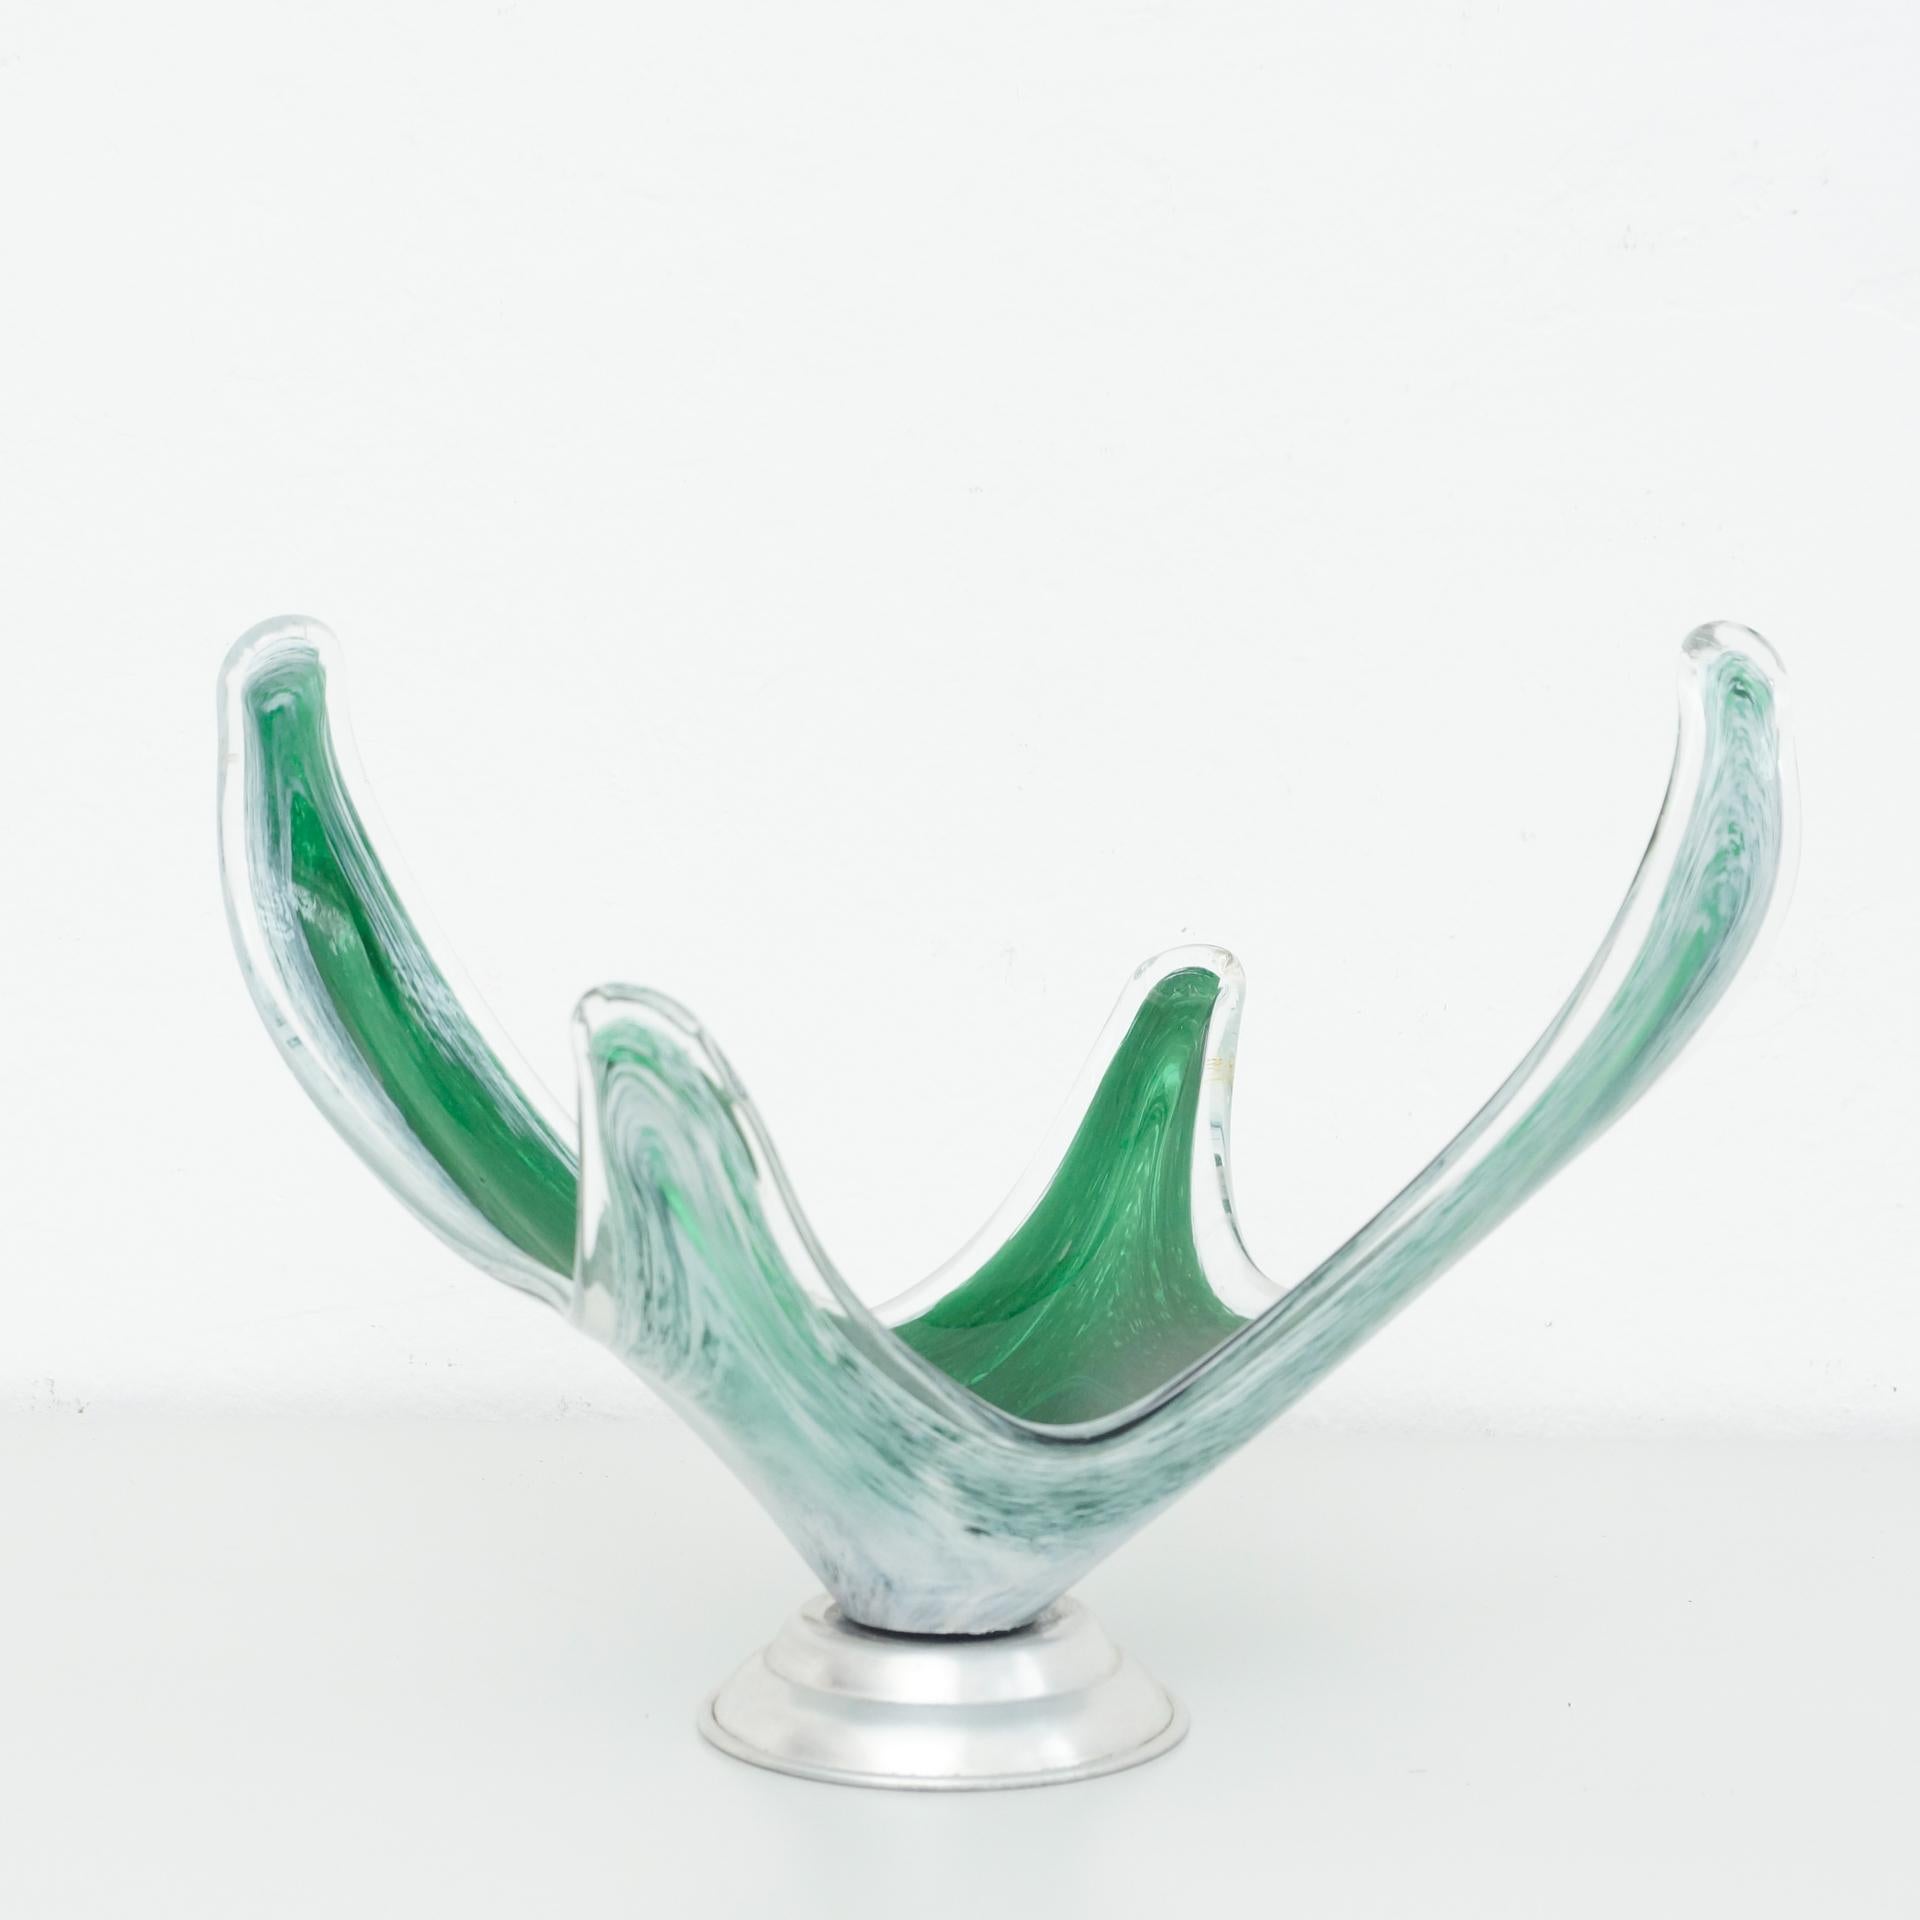 Green murano glass vase, circa 1970
Manufactured in Italy.

In original condition, with minor wear consistent of age and use, preserving a beautiful patina.